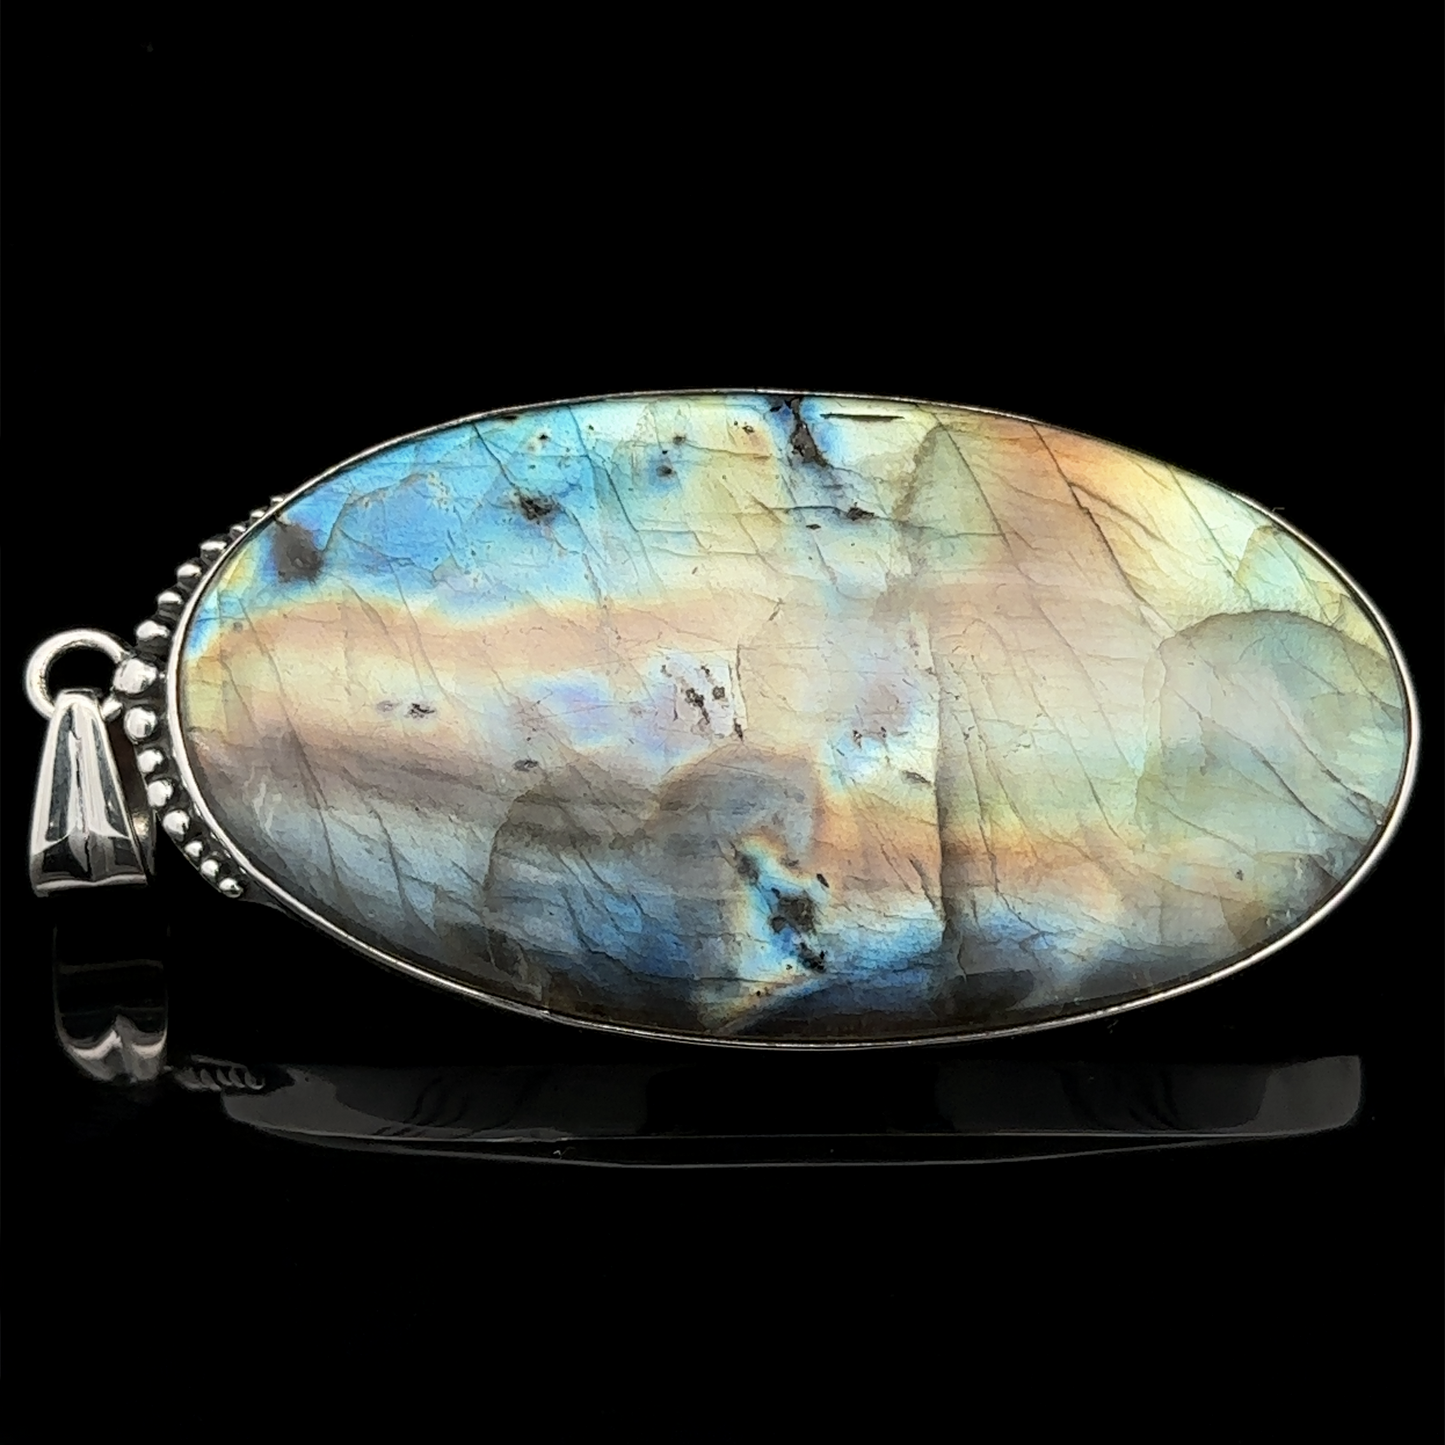 
                  
                    A polished, oval-shaped pendant featuring a labradorite gemstone with iridescent blue and brown hues, set in a sterling silver bezel against a black background. This statement piece is a stunning addition to any collection of XL Statement Oval Labradorite Pendants.
                  
                